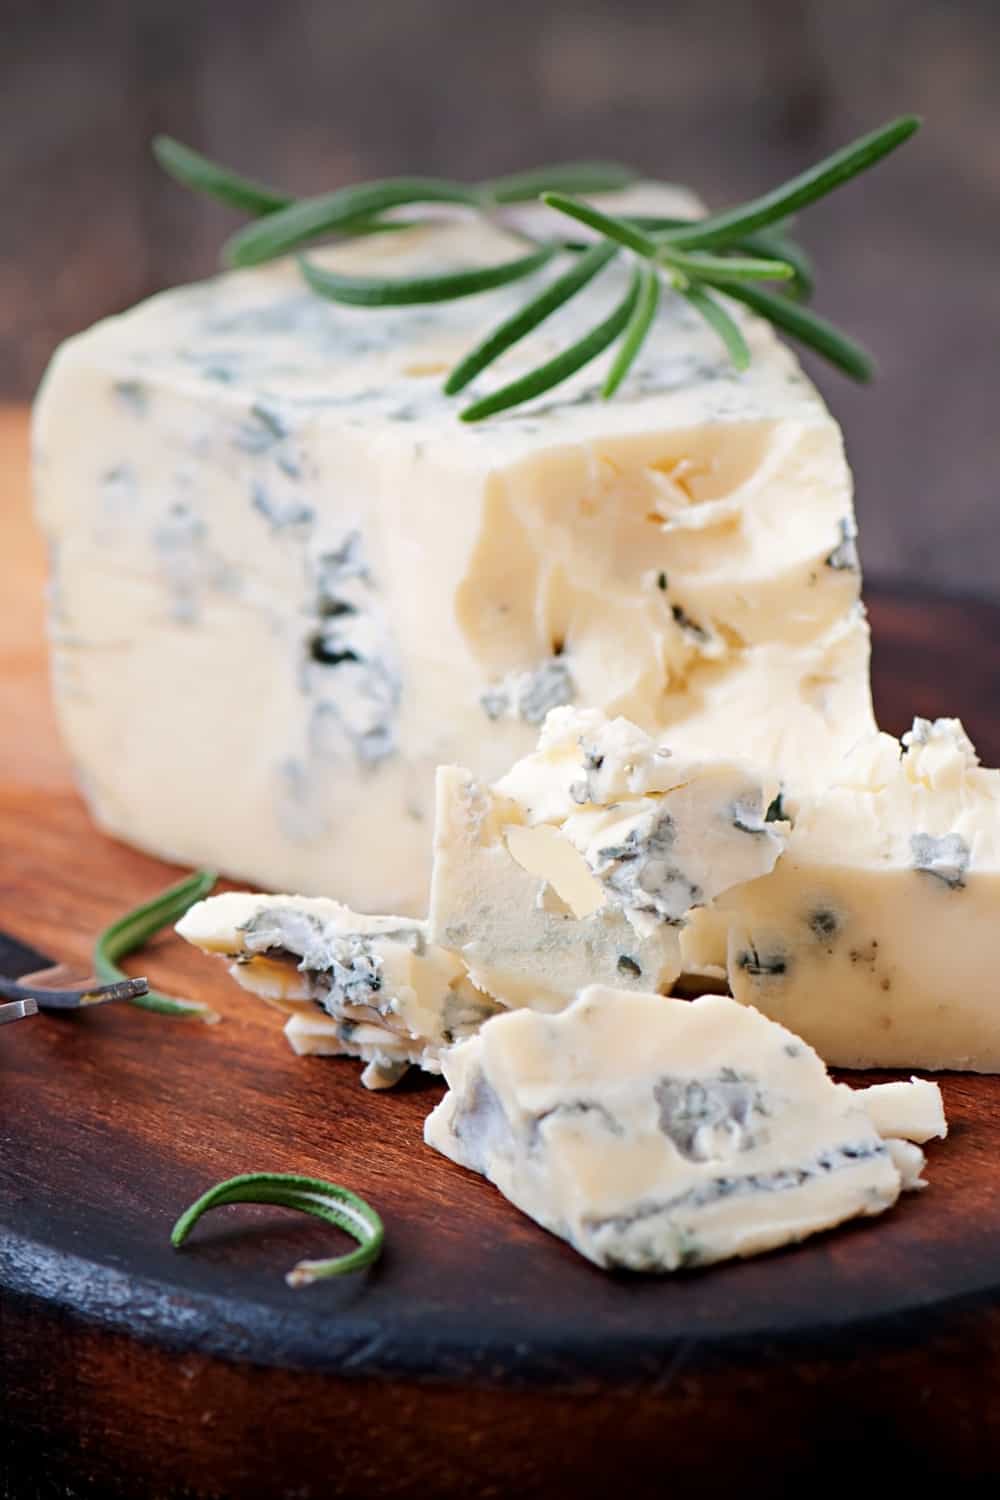 What does gorgonzola dolce look and taste like